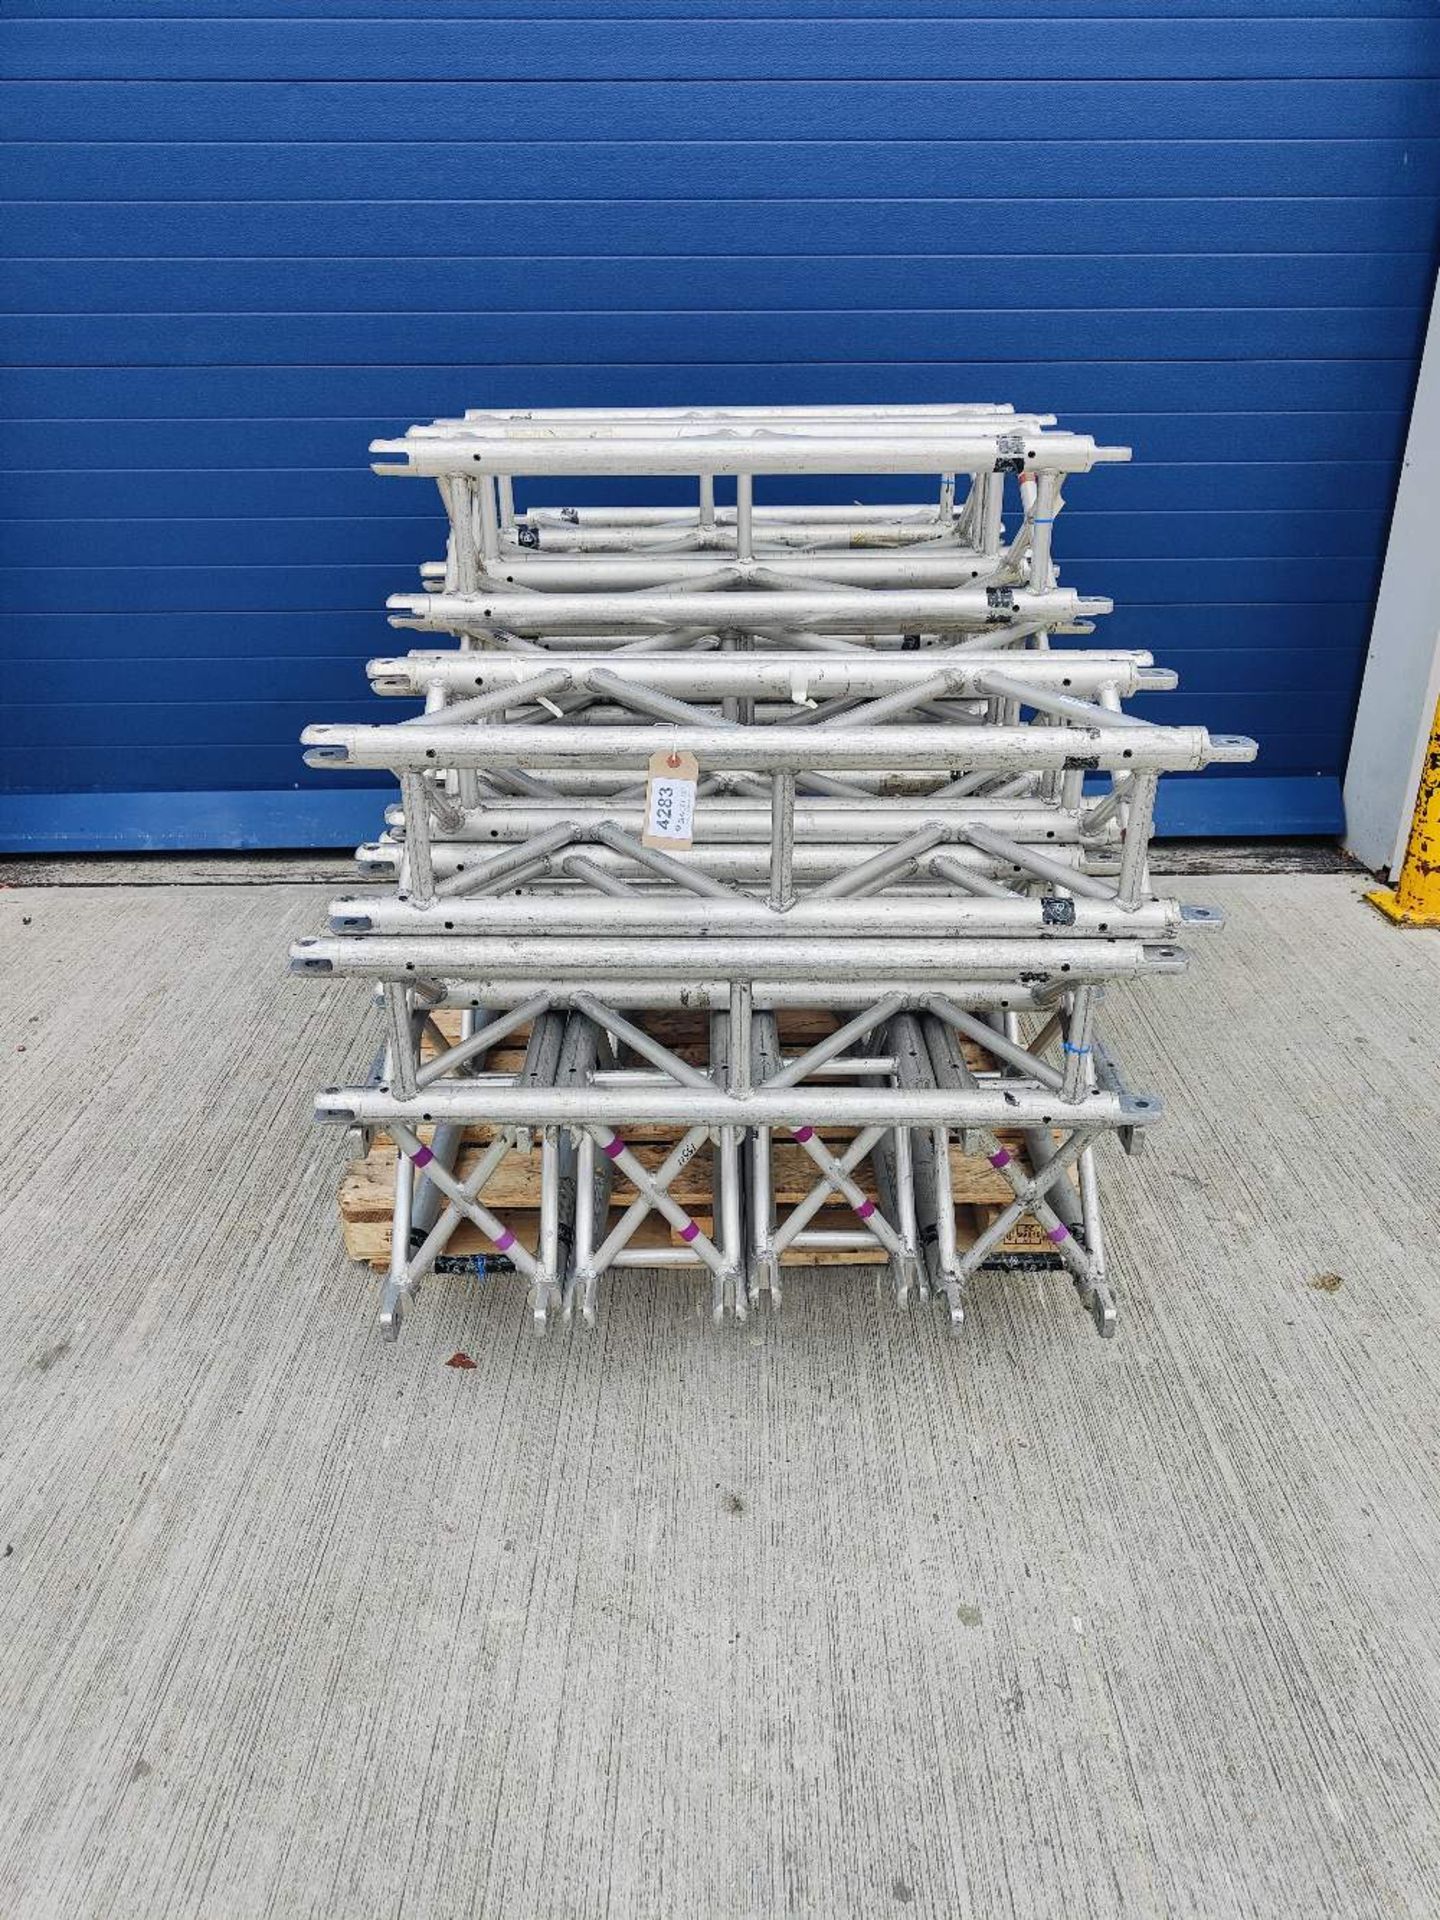 Quantity of Slick Minibeam 6ft and 1m Truss Sections